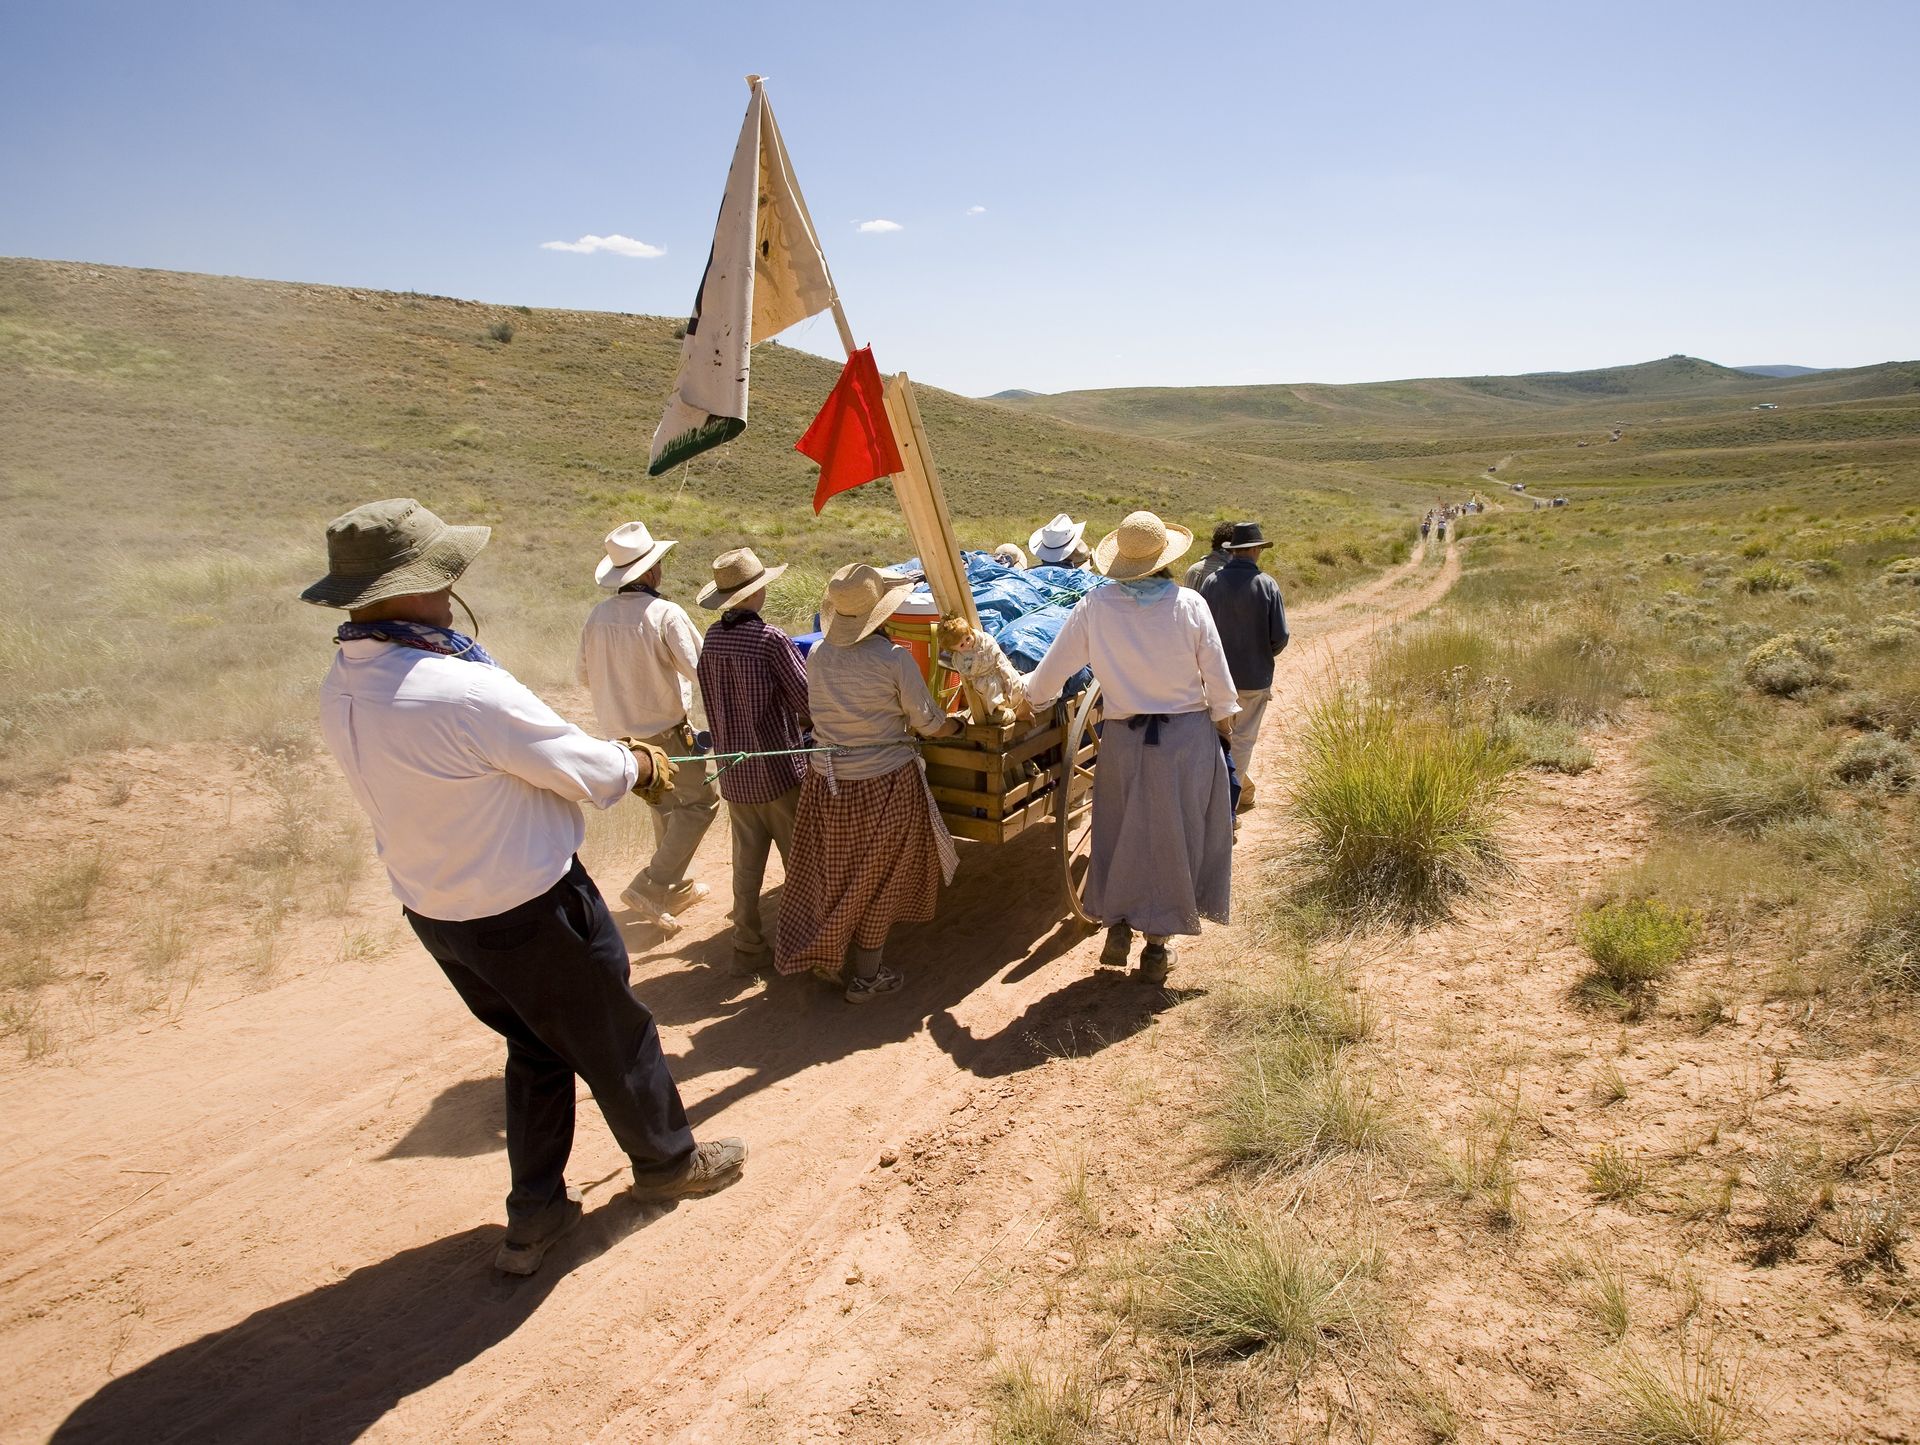 A group of men and women slowly push a handcart down a hill.